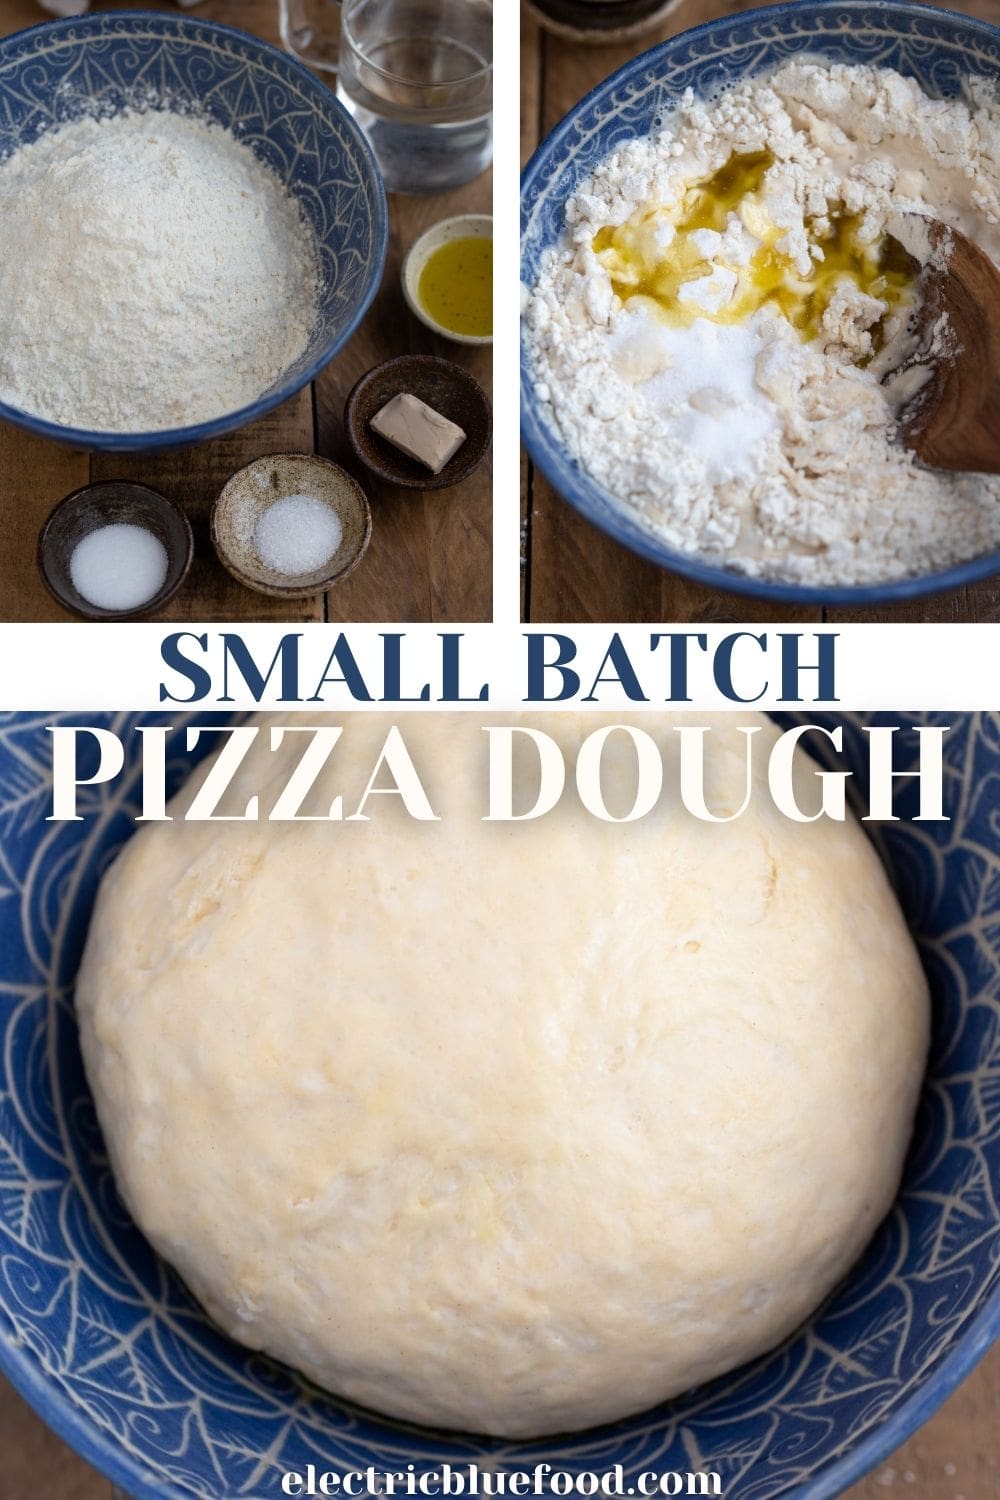 A small batch pizza dough recipe for one pizza. Make less, eat less. But from scratch.